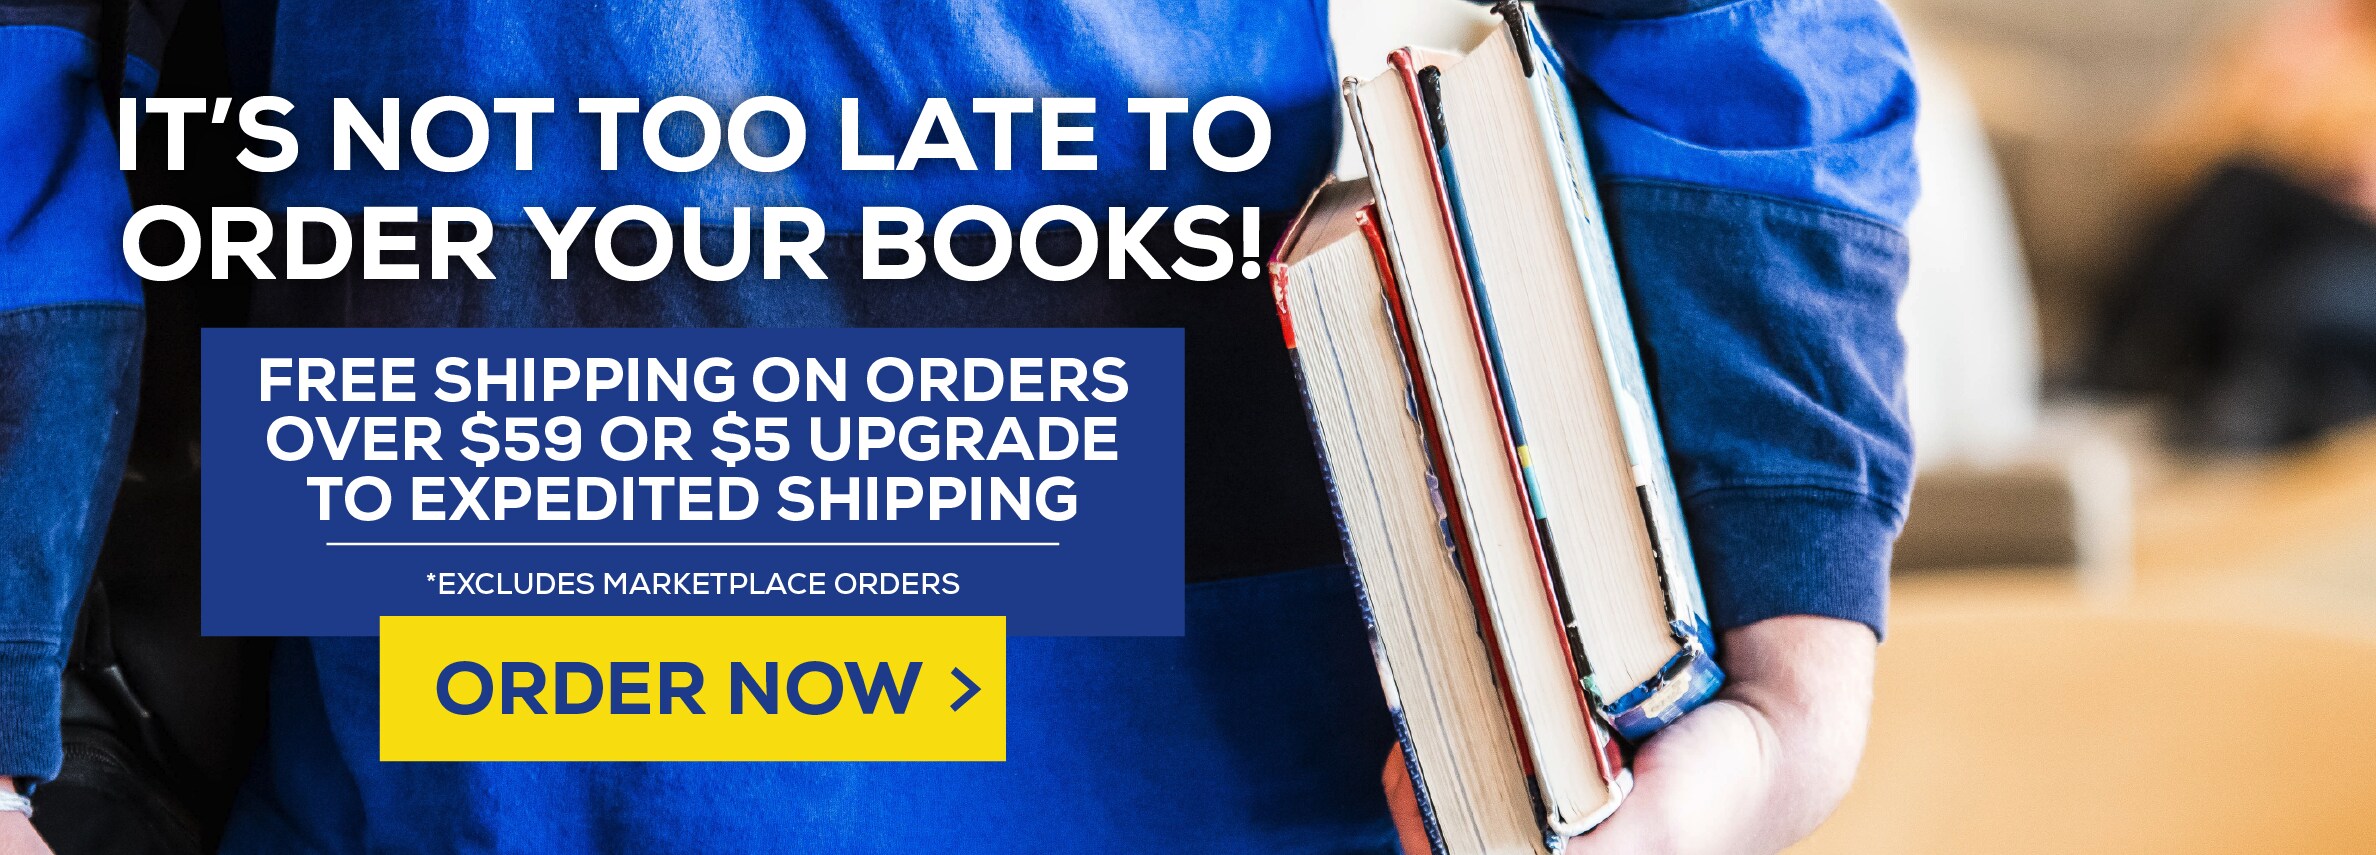 It's not too late to order your textbooks! Free Shipping on Orders Over $59 or $5 Upgrade to Expedited Shipping* Excludes Marketplace Purchases. Order now